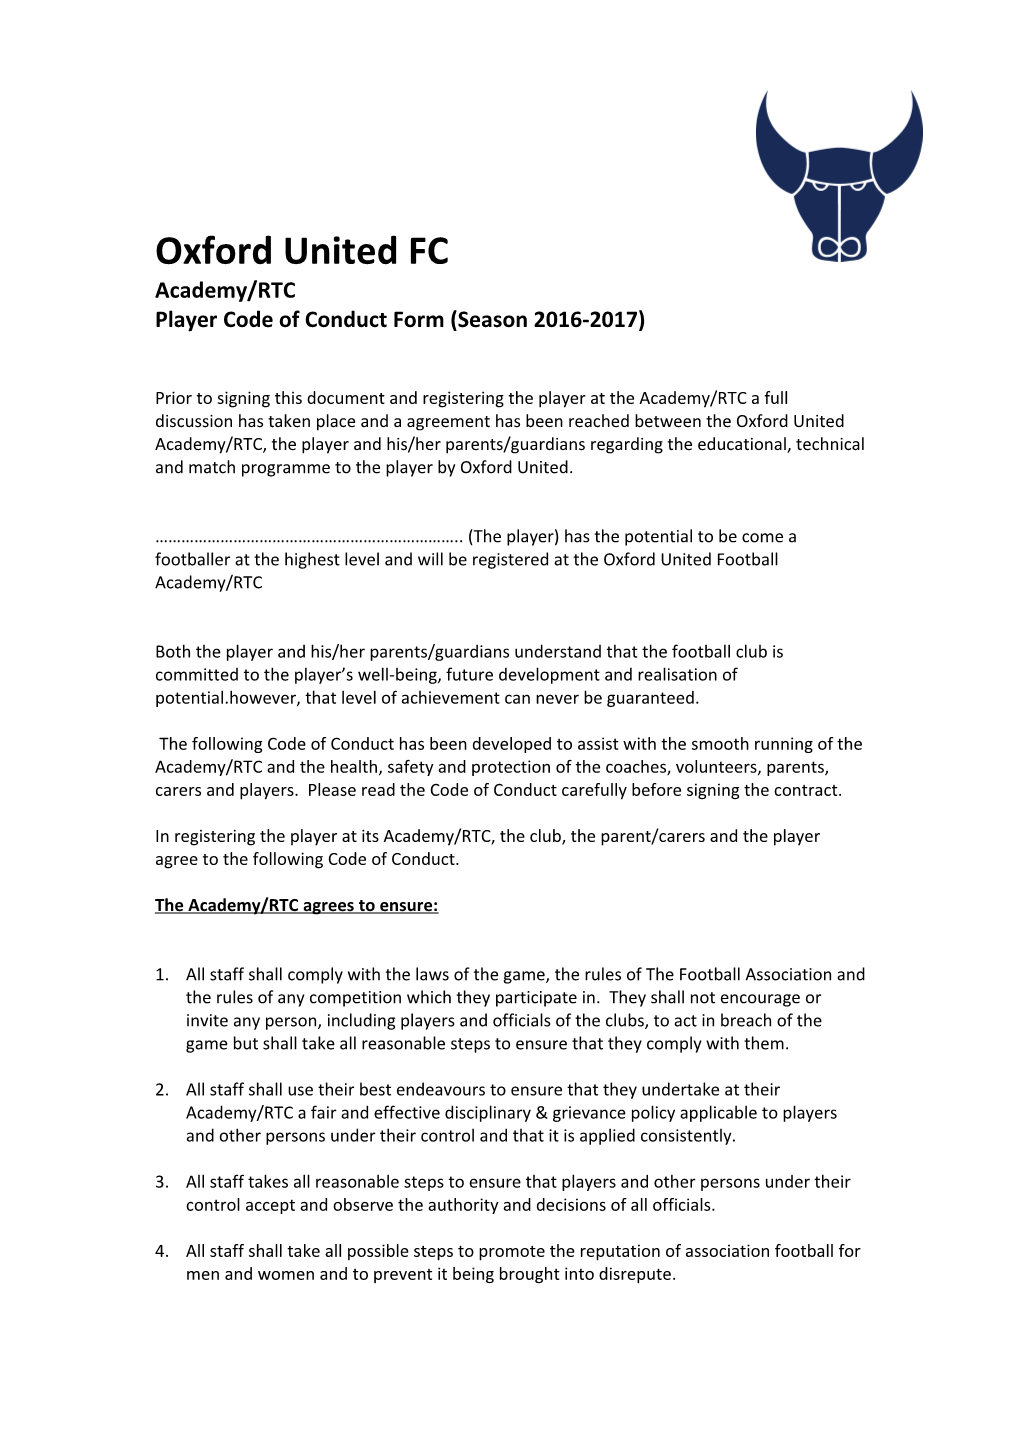 Player Code of Conduct Form (Season 2016-2017)